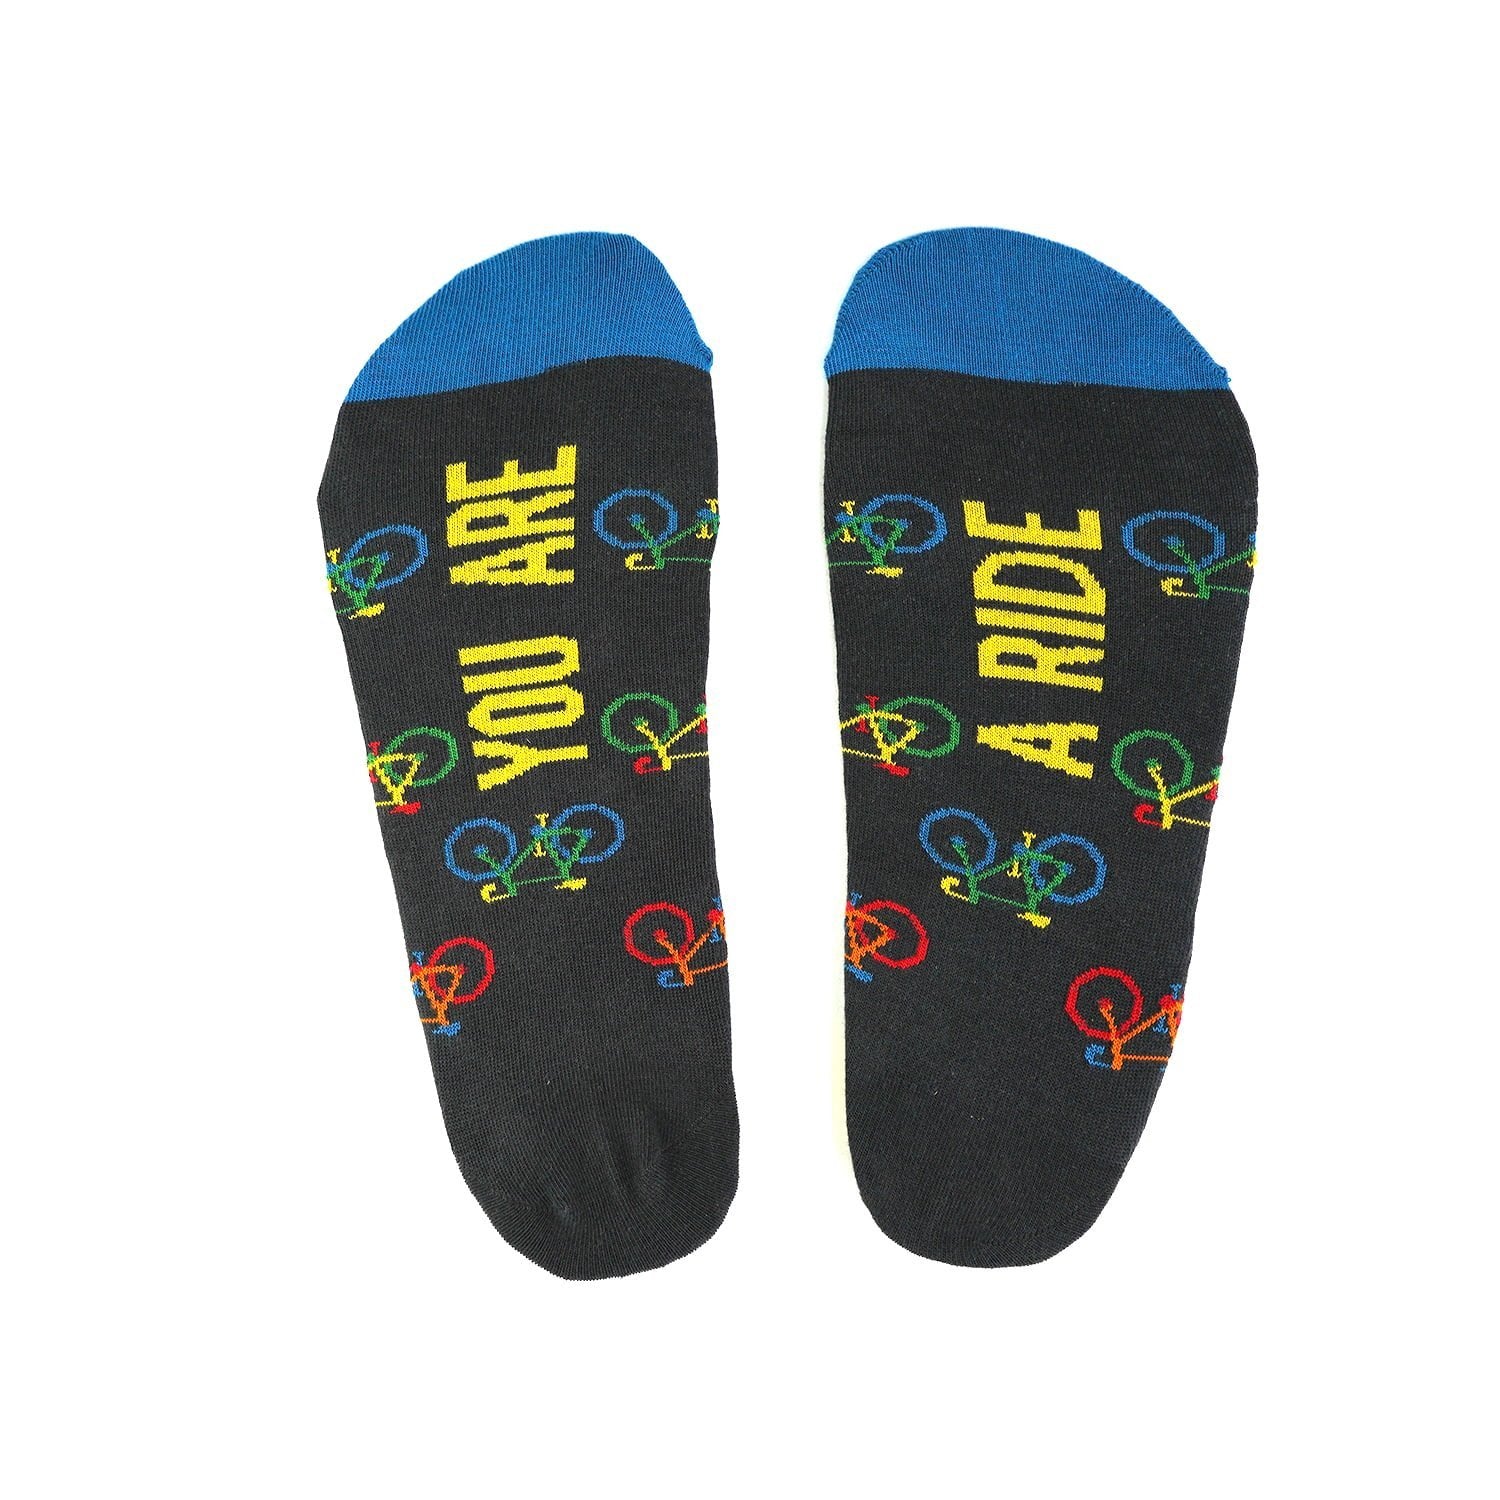 Socks - You Are A Ride - Ankle Socks